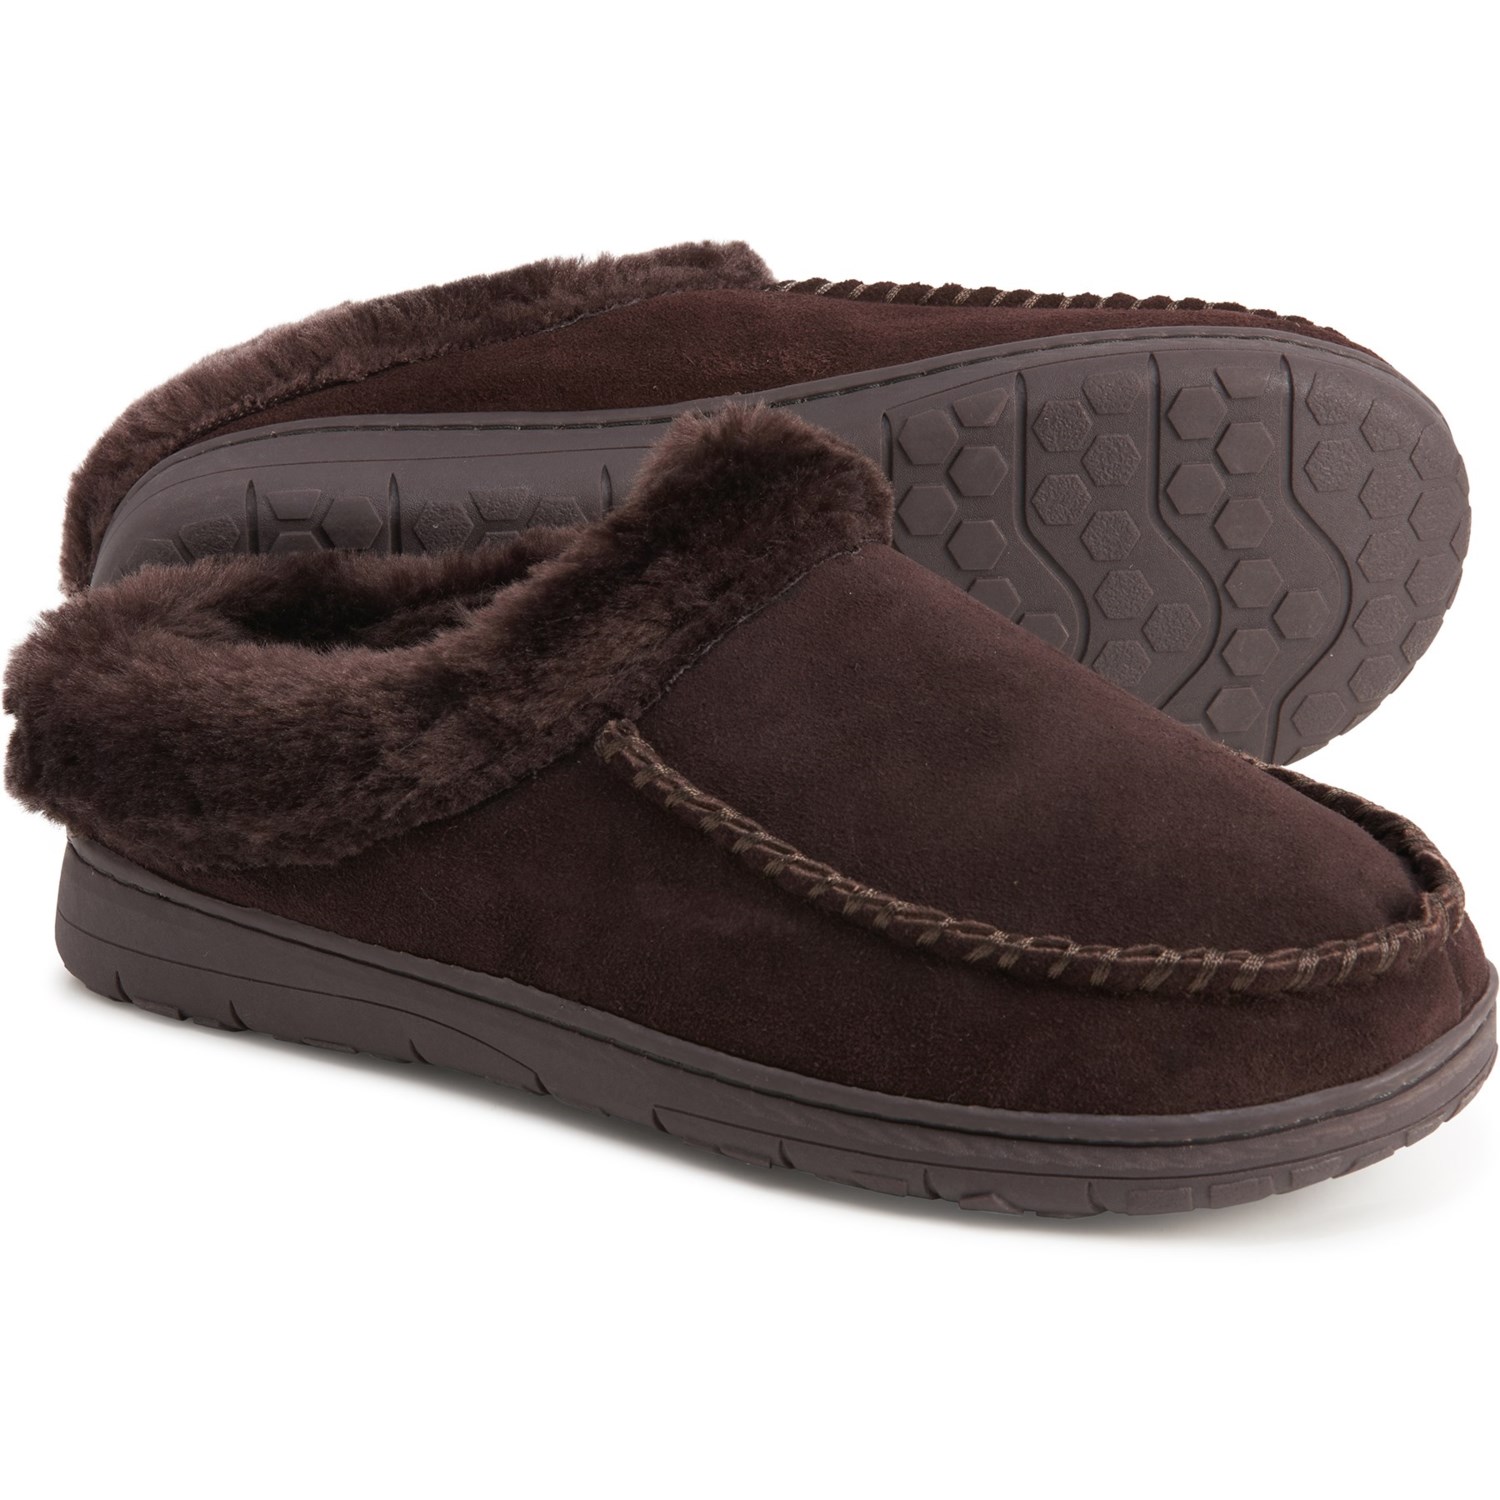 suede clog slippers